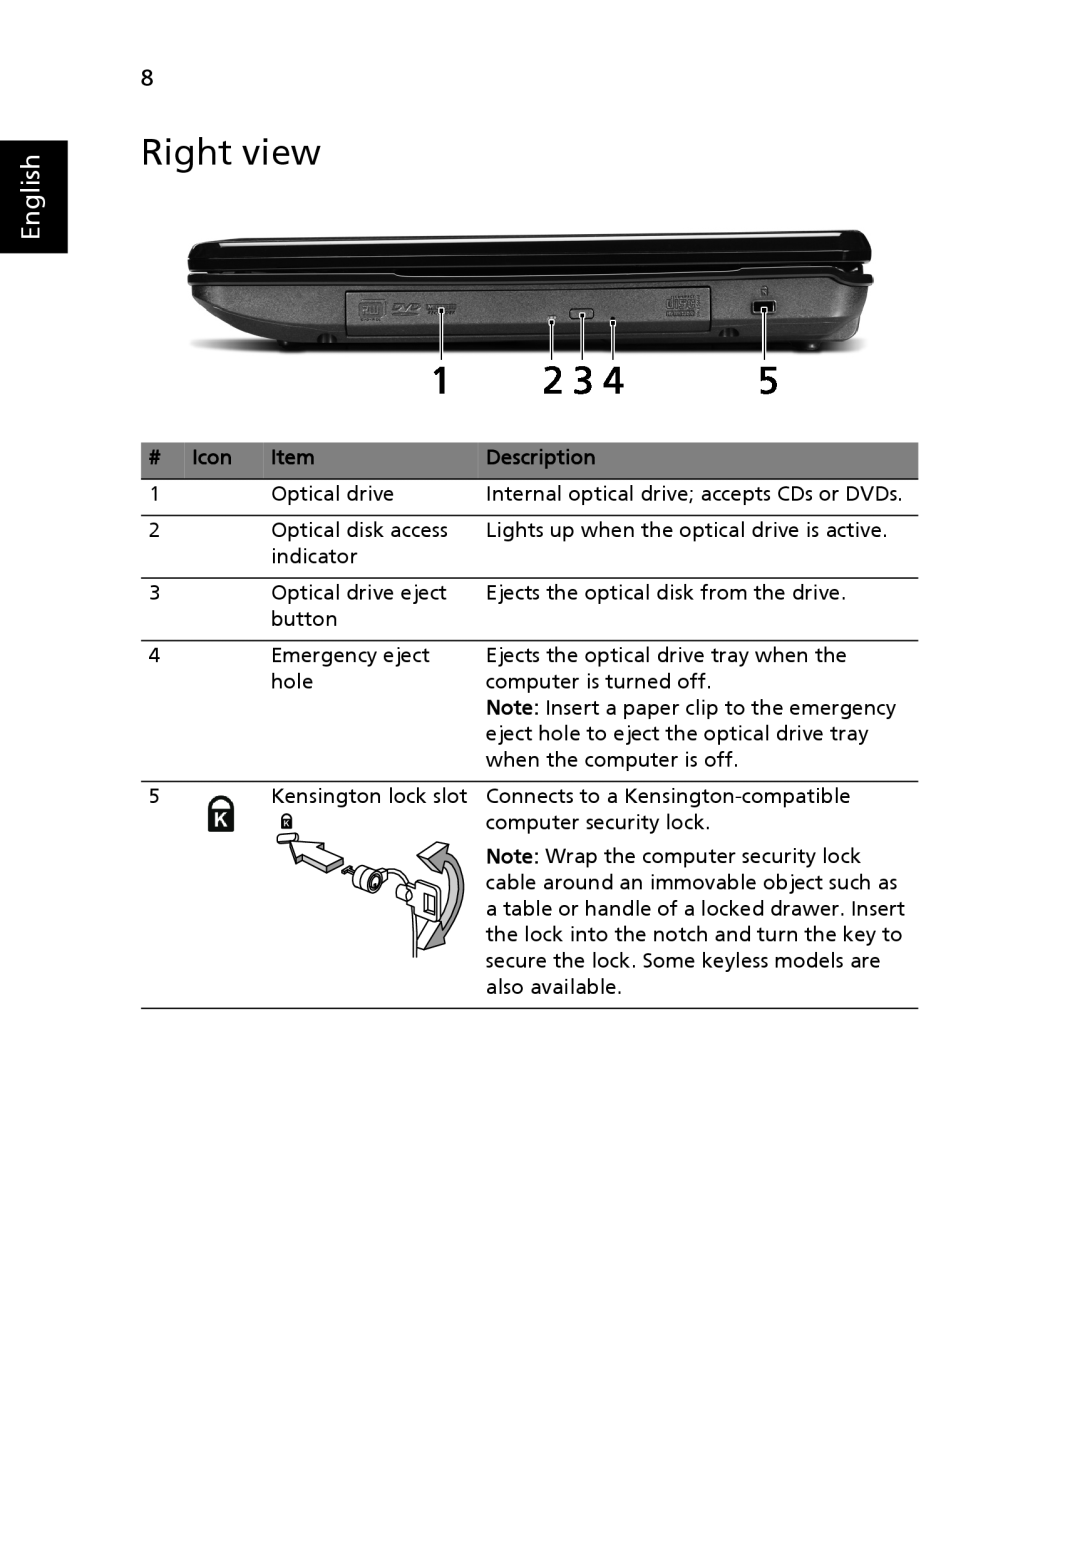 Acer 5516 Series manual Right view, English 